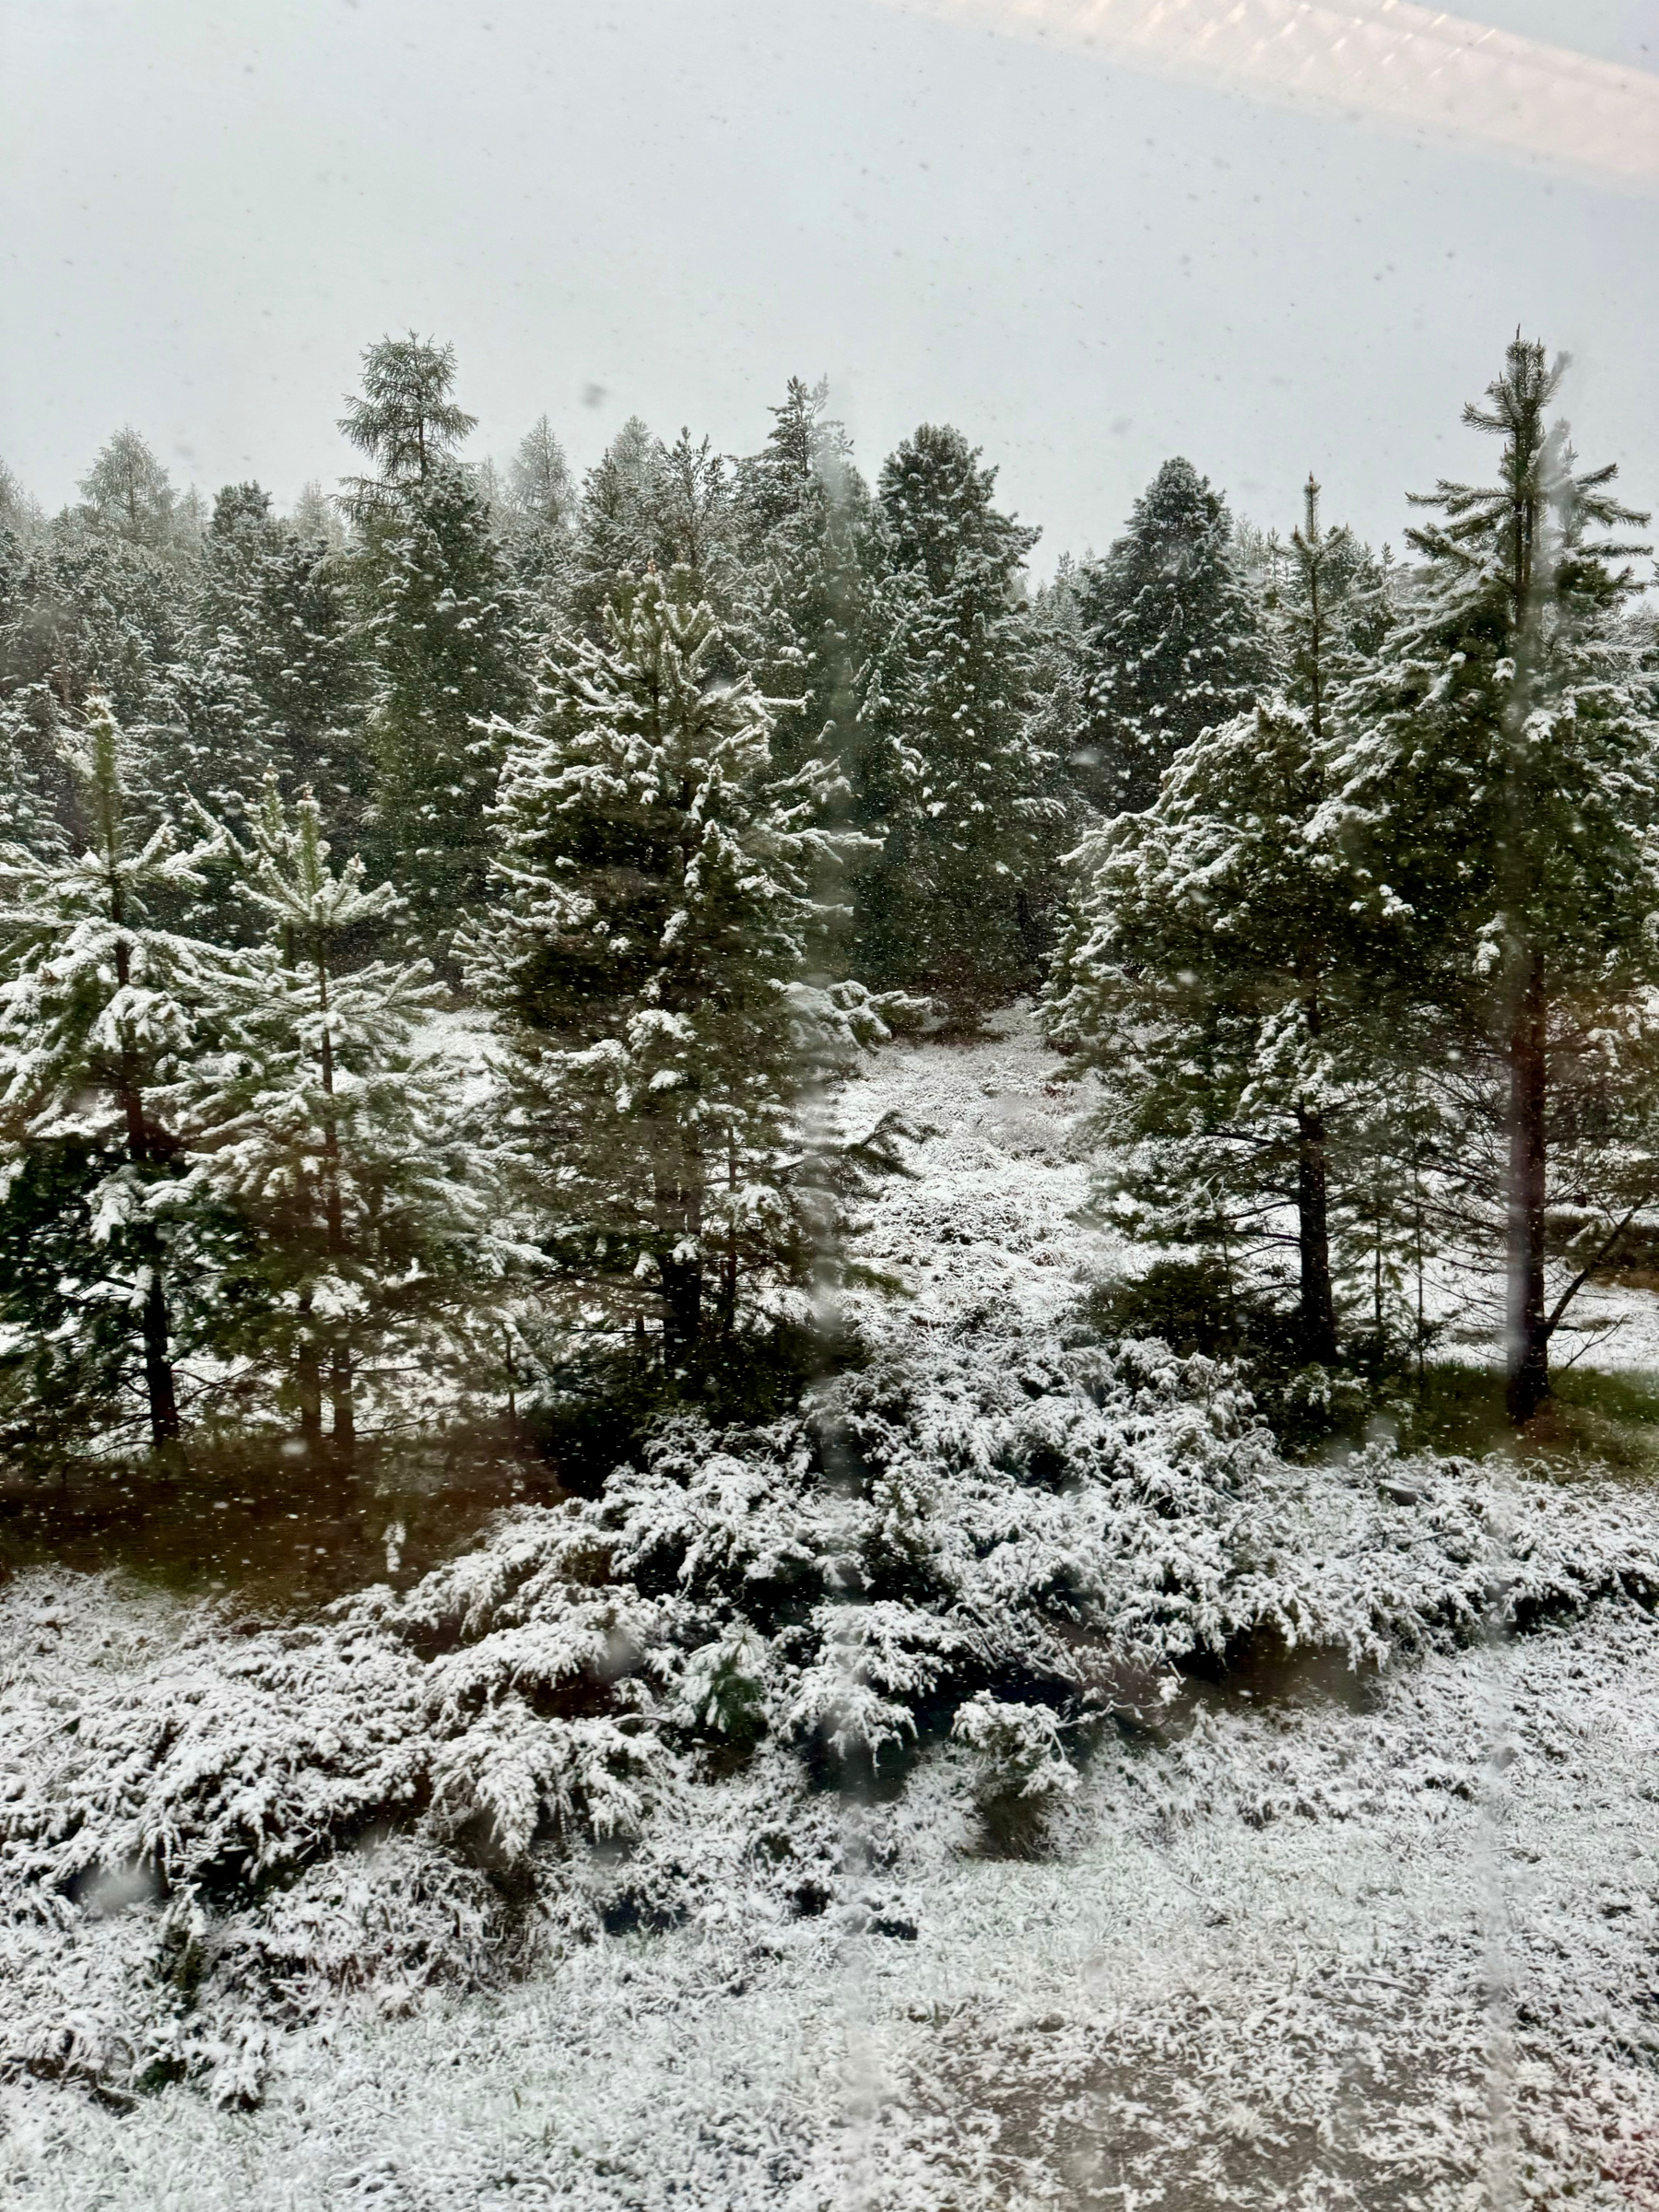 A serene forest scene with evergreen trees covered in a light layer of snow. The ground is also lightly dusted with snow, creating a calm winter atmosphere. The sky is overcast, and snow is gently falling.